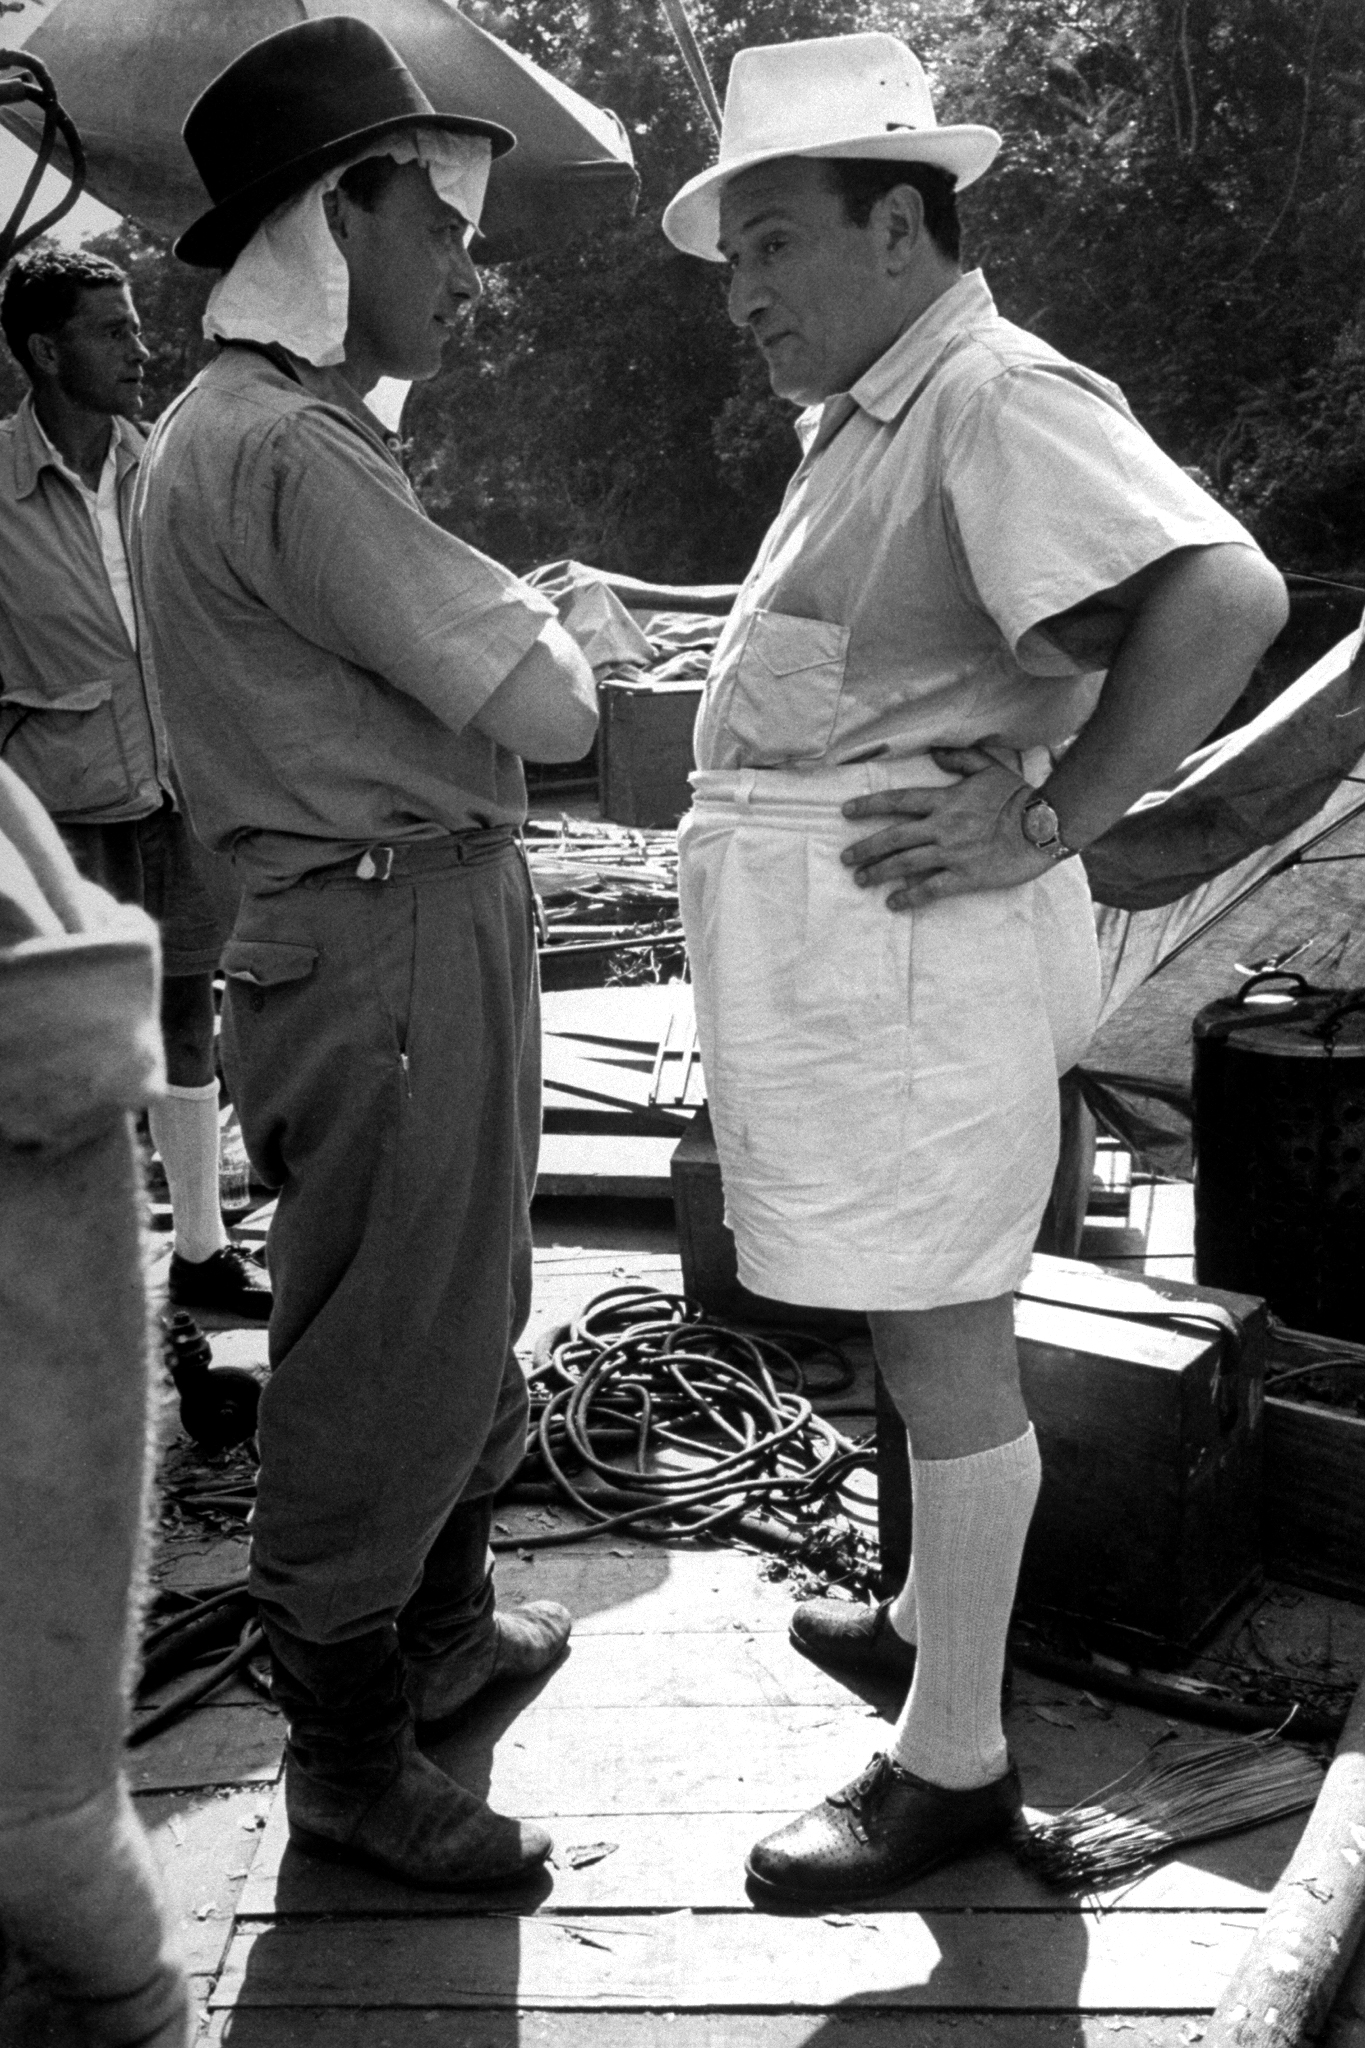 Chief cameraman Jack Cardiff and producer Sam Spiegel discuss technical specifications during filming of The African Queen. Spiegel went on to produce 1962's Lawrence of Arabia, which won the Oscar for Best Picture.